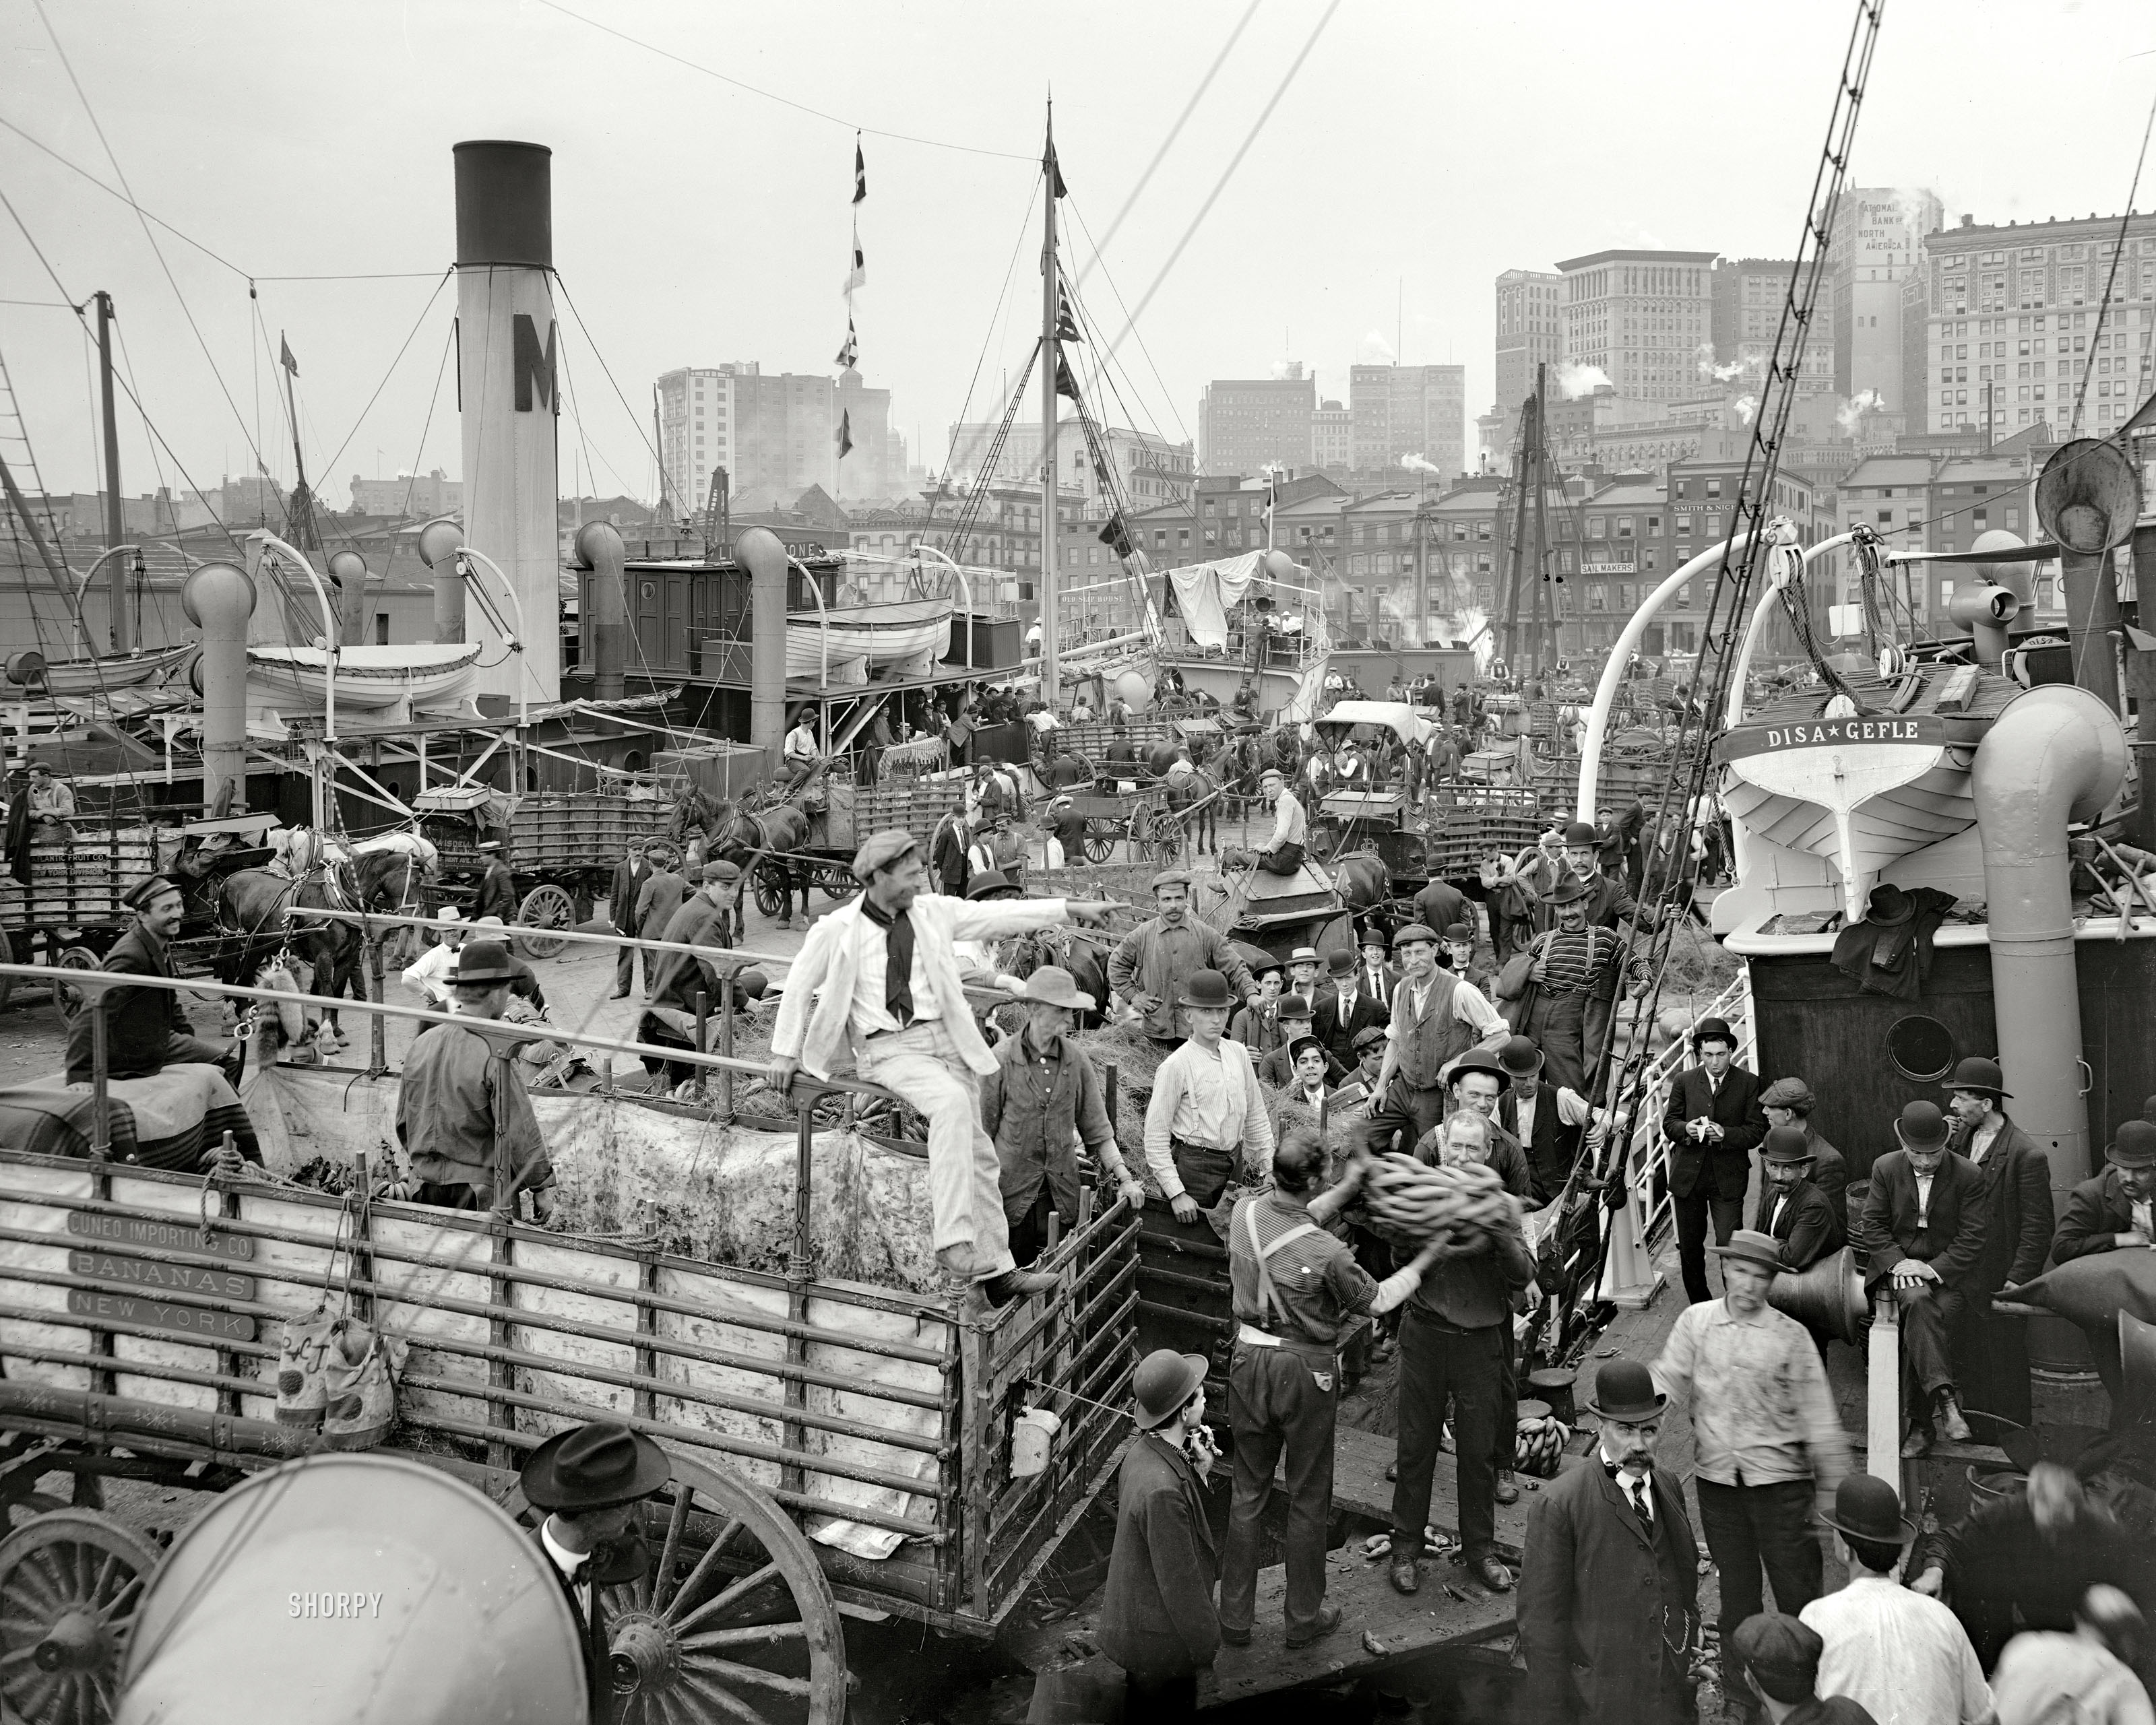 Circa 1906. "Banana docks, New York." An interesting cast of characters. 8x10 inch dry plate glass negative, Detroit Publishing Company. View full size.